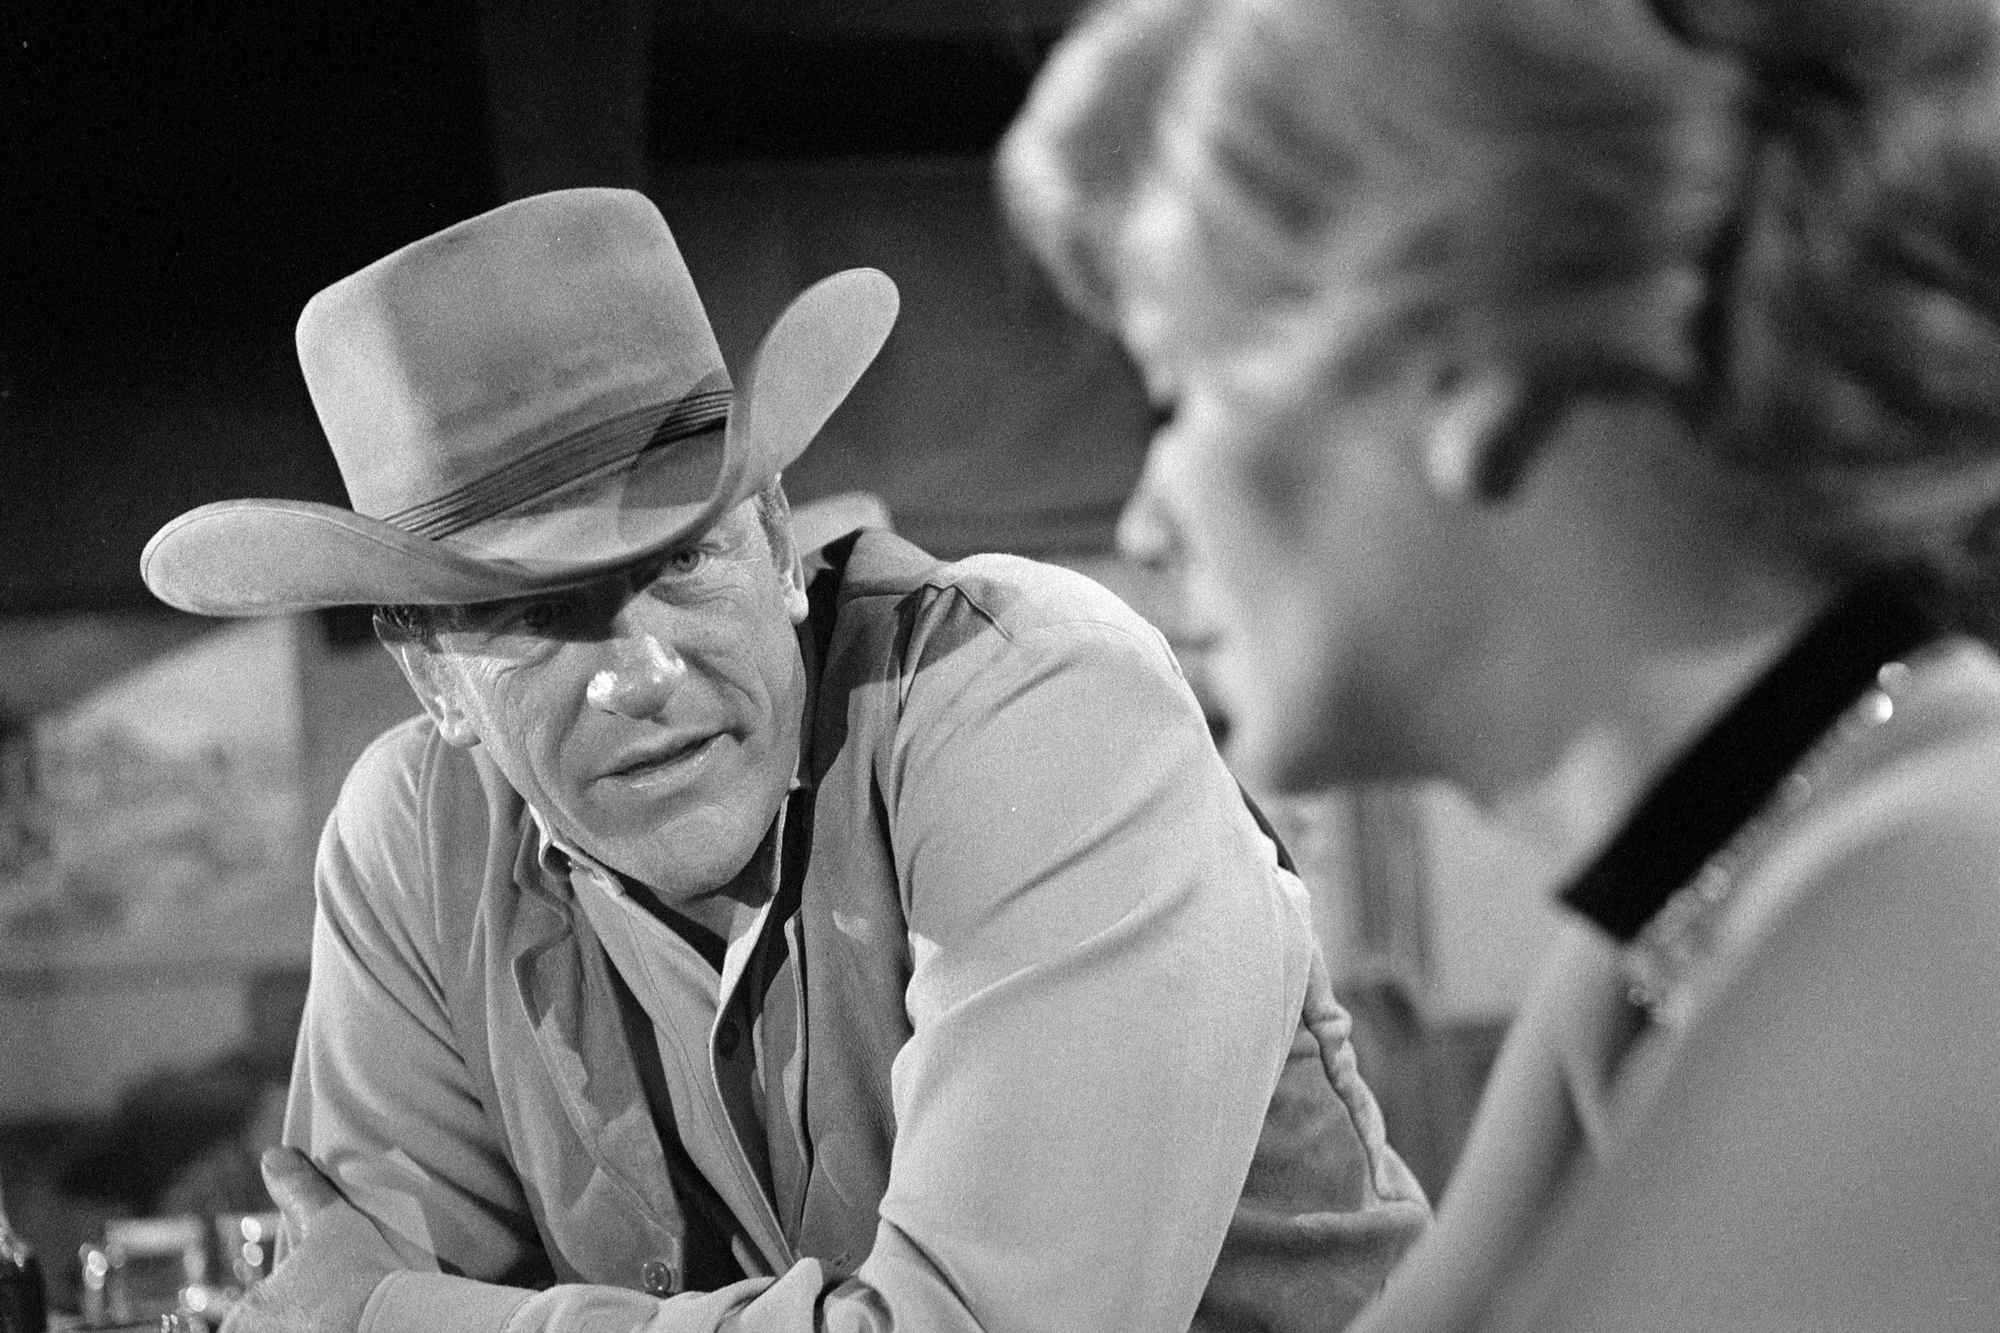 'Gunsmoke' James Arness as Matt Dillon and Betty Hutton as Molly McConnell look at one another, leaning on a table.